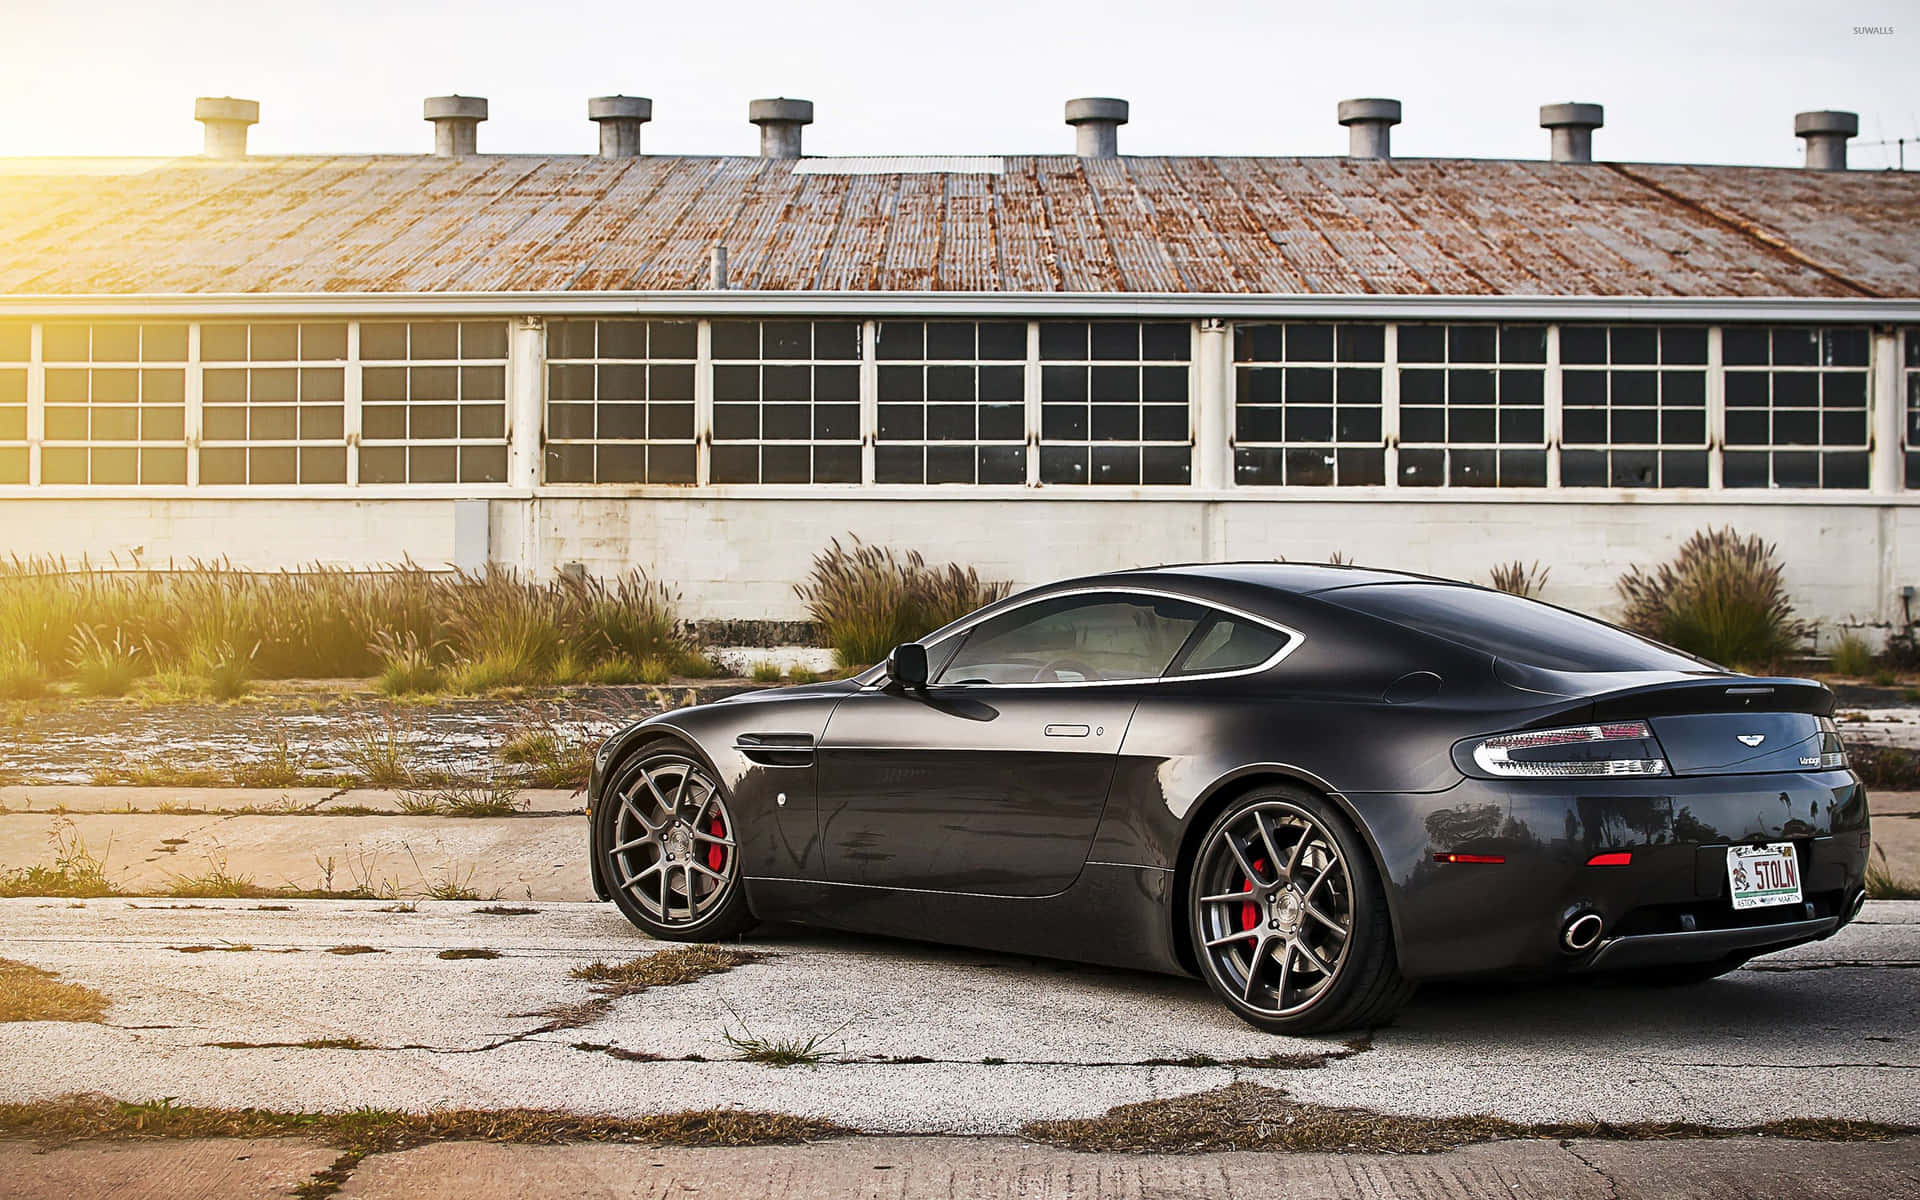 Aston Martin Vanquish in action on a scenic road Wallpaper